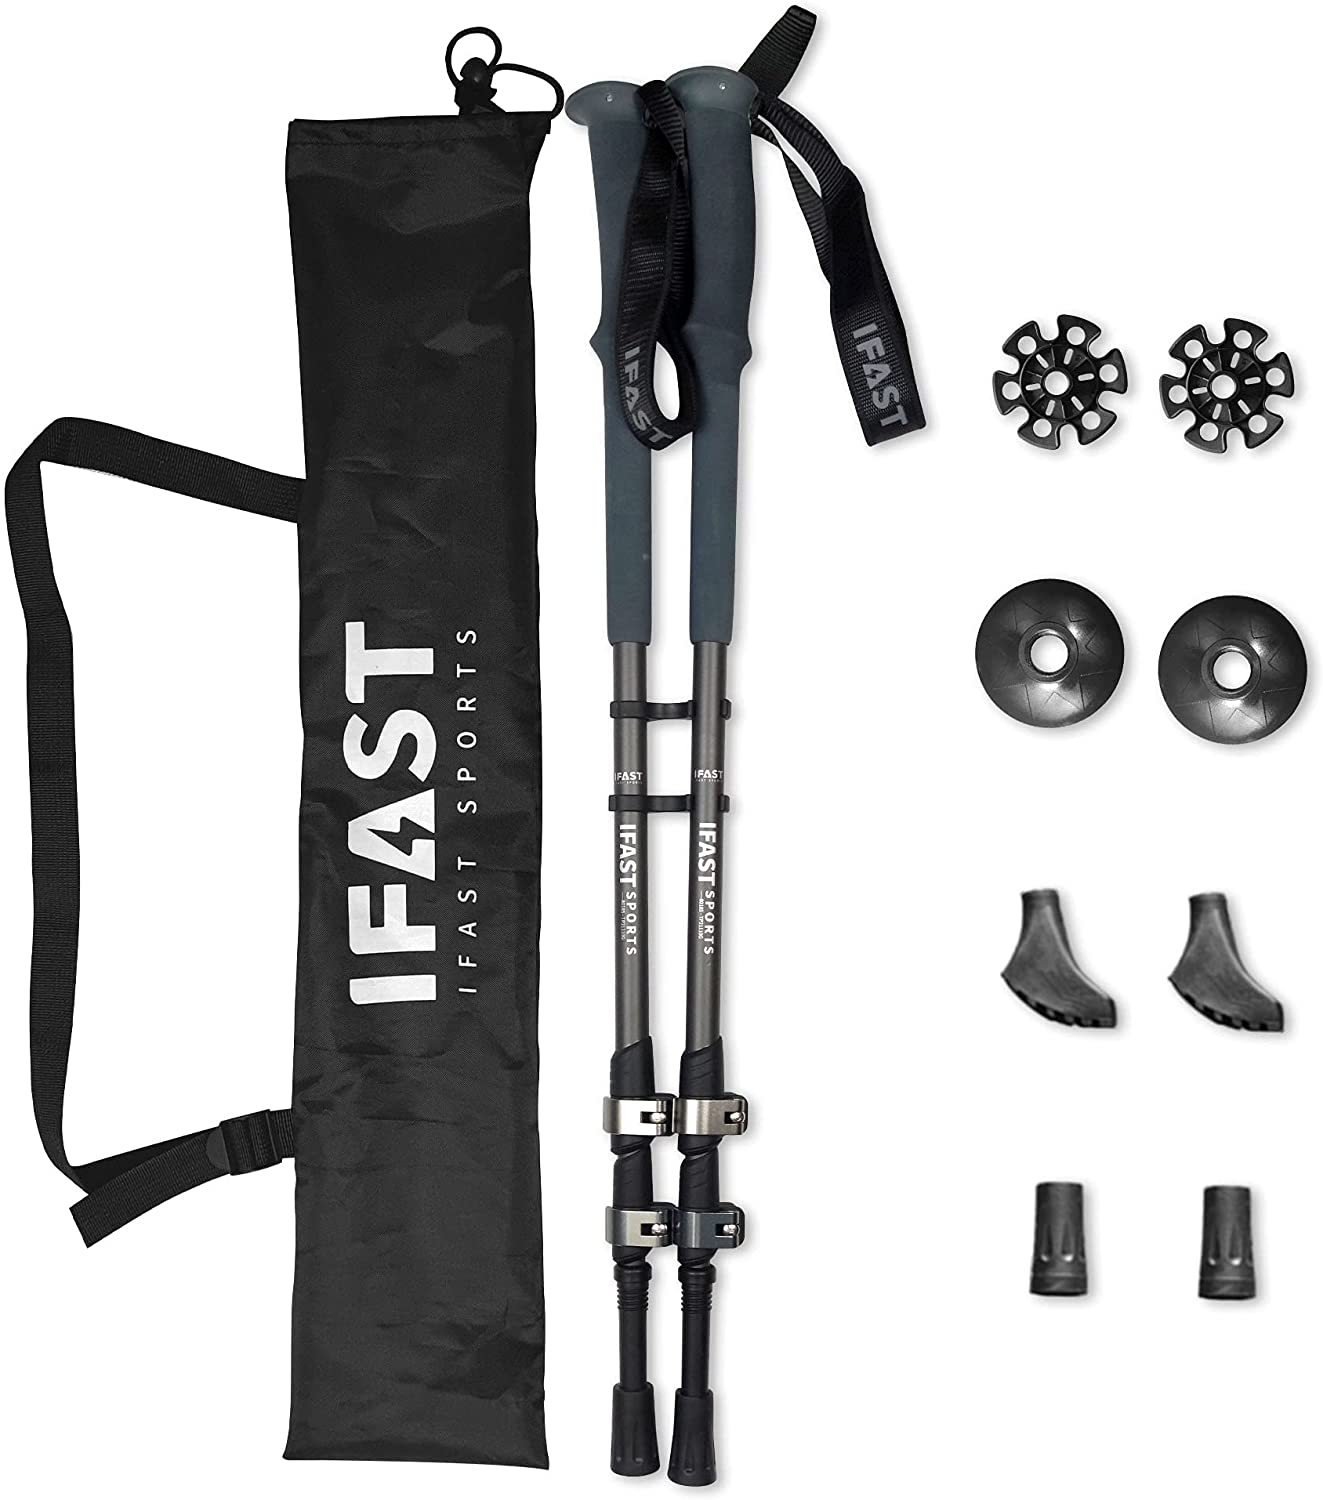 IFAST collapsible hiking poles